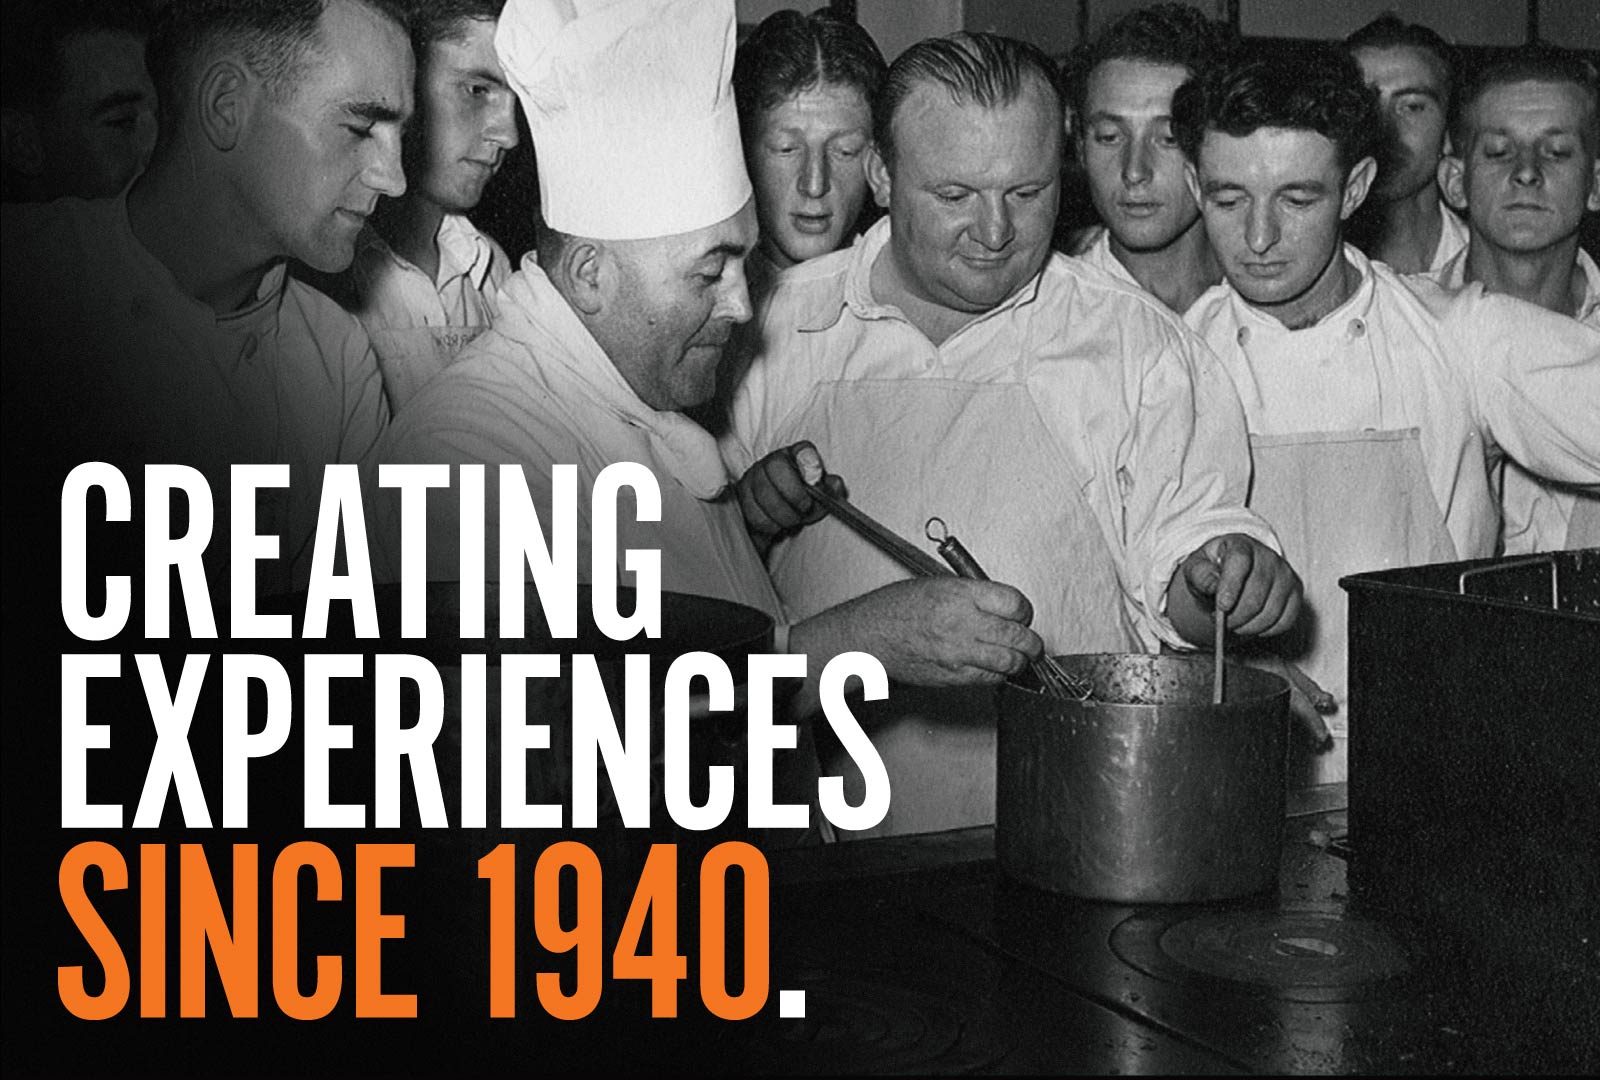 Vintage black and white photograph of a group of chefs, with a superimposed headline "Creating Experiences Since 1940"